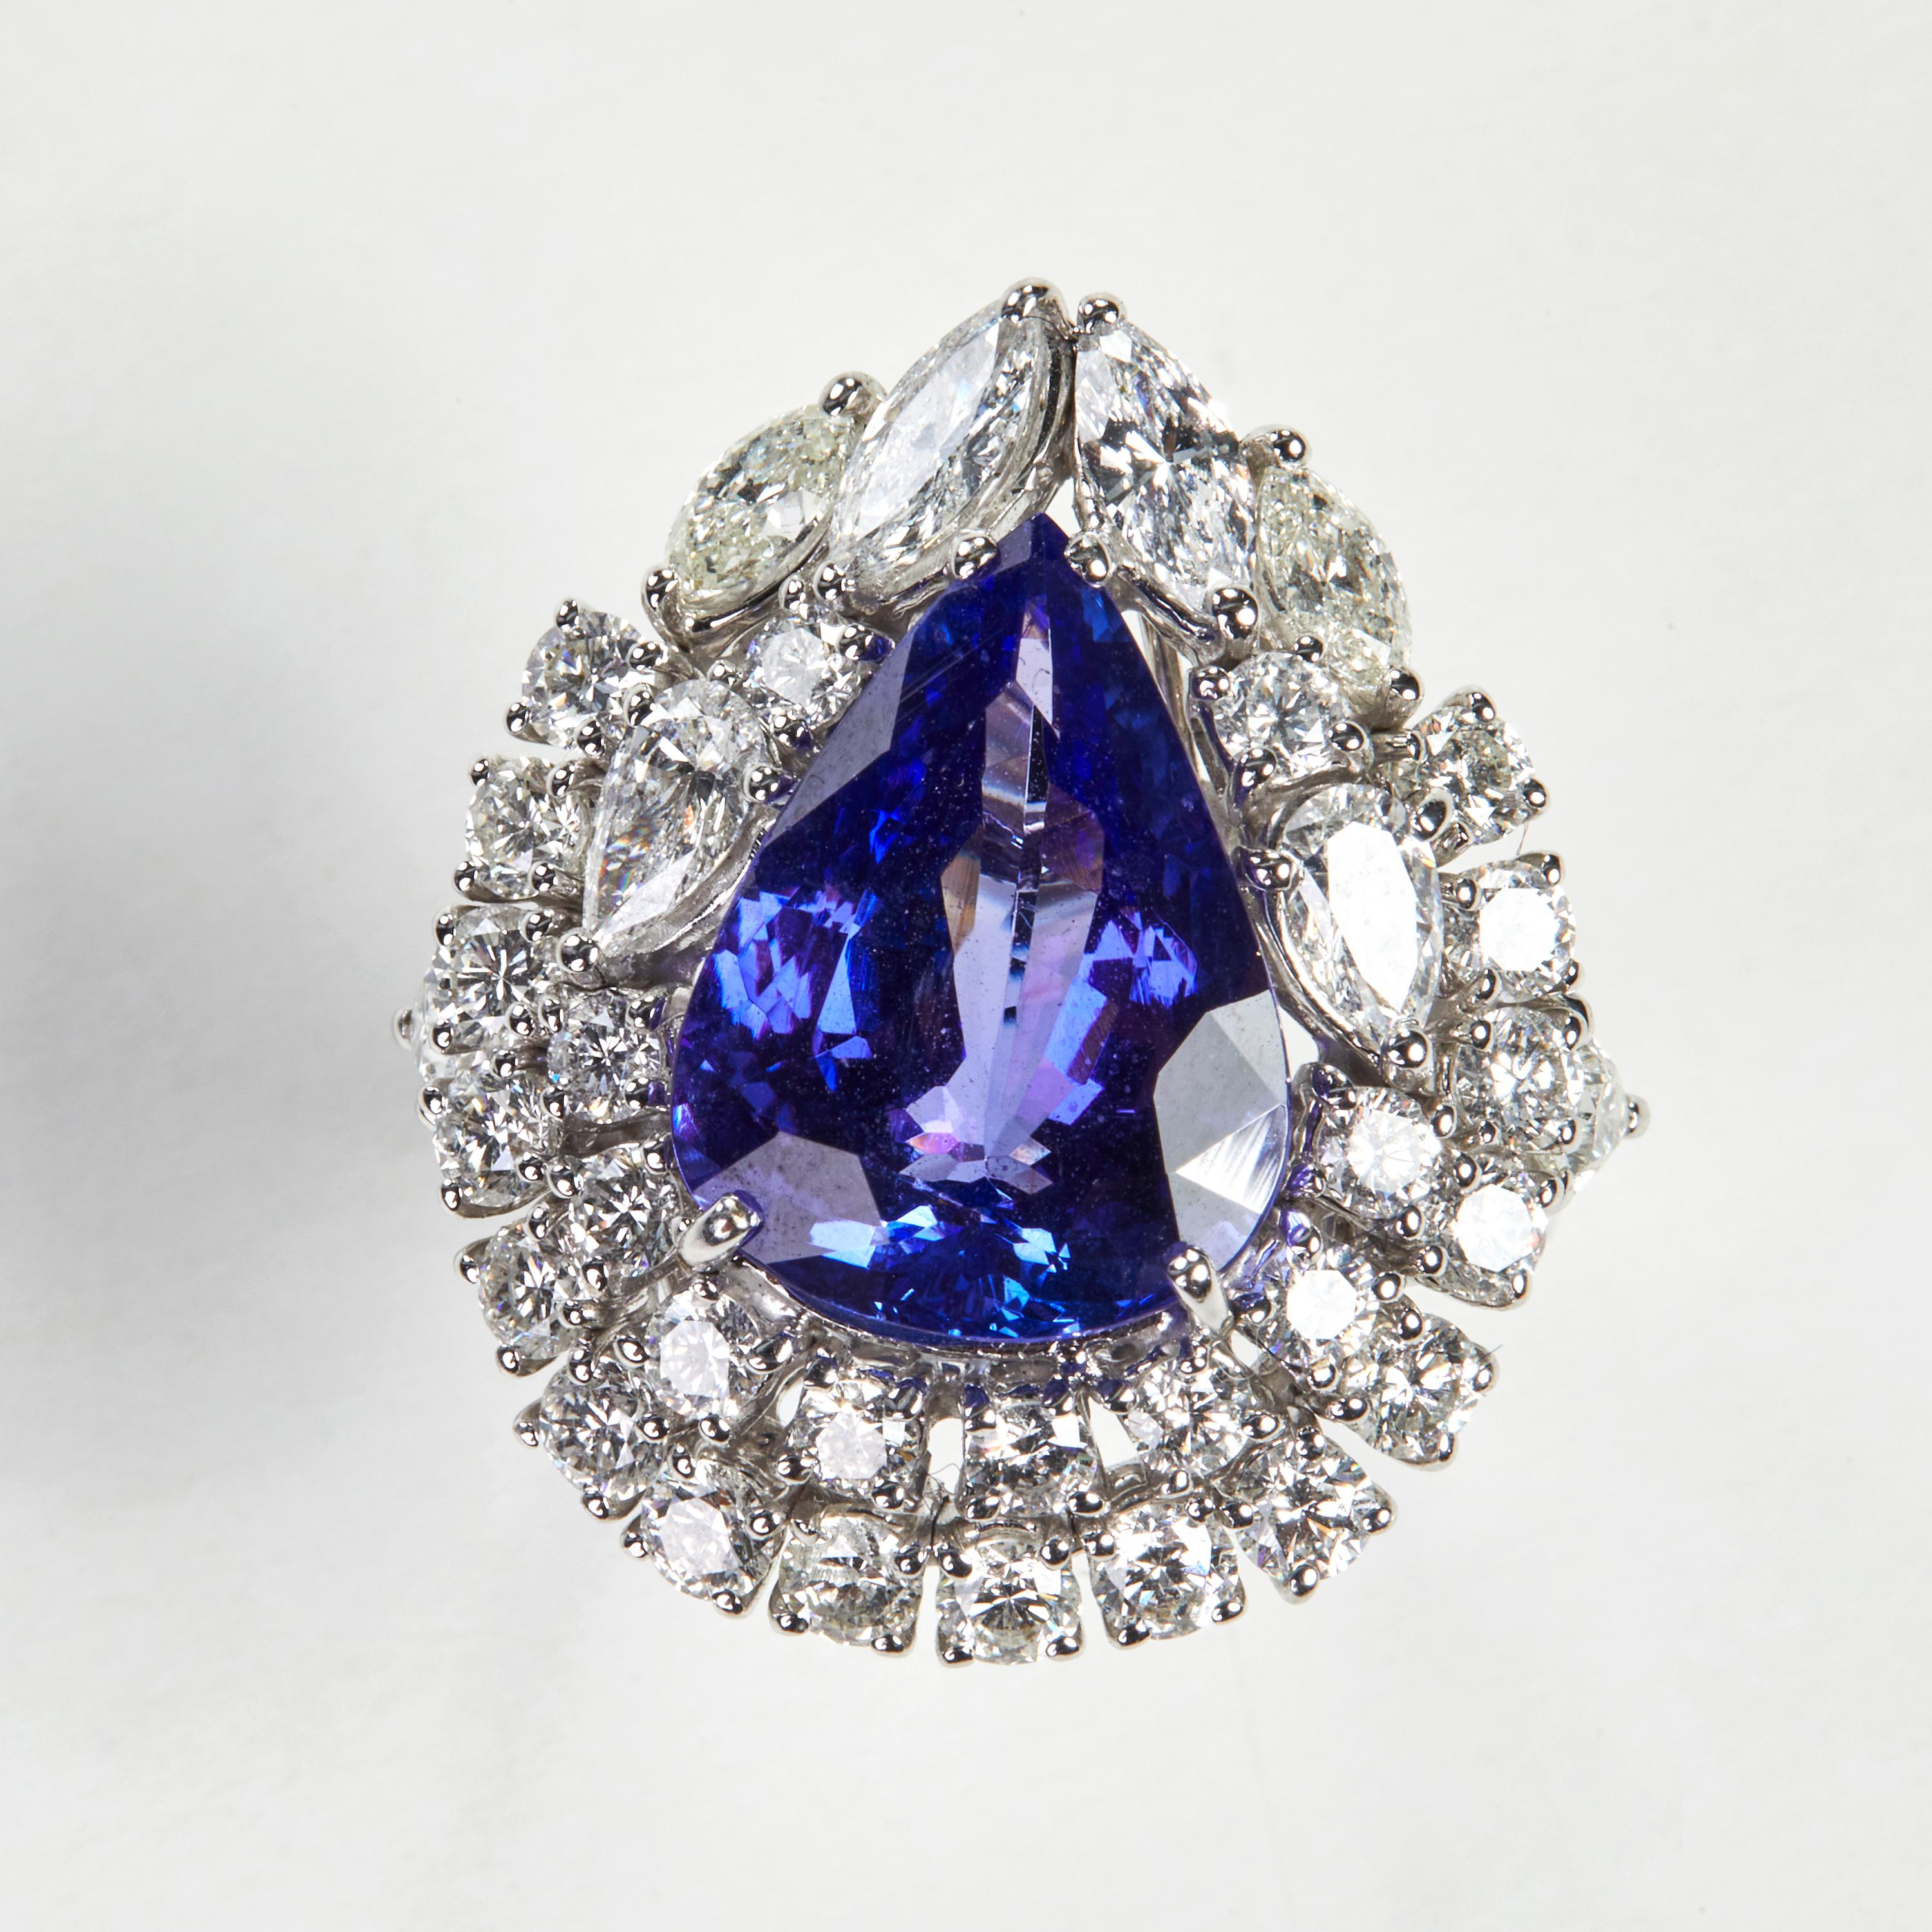 
Beautiful 18 Karat white gold cocktail ring with a stunning 6.50 carat tanzanite center stone. This ring combines classical with modern elements and can be worn every day! 

34  Diamonds 2.92 carat

1 Tansanite Pear. 6.50 carat

Size EU 53.5 US